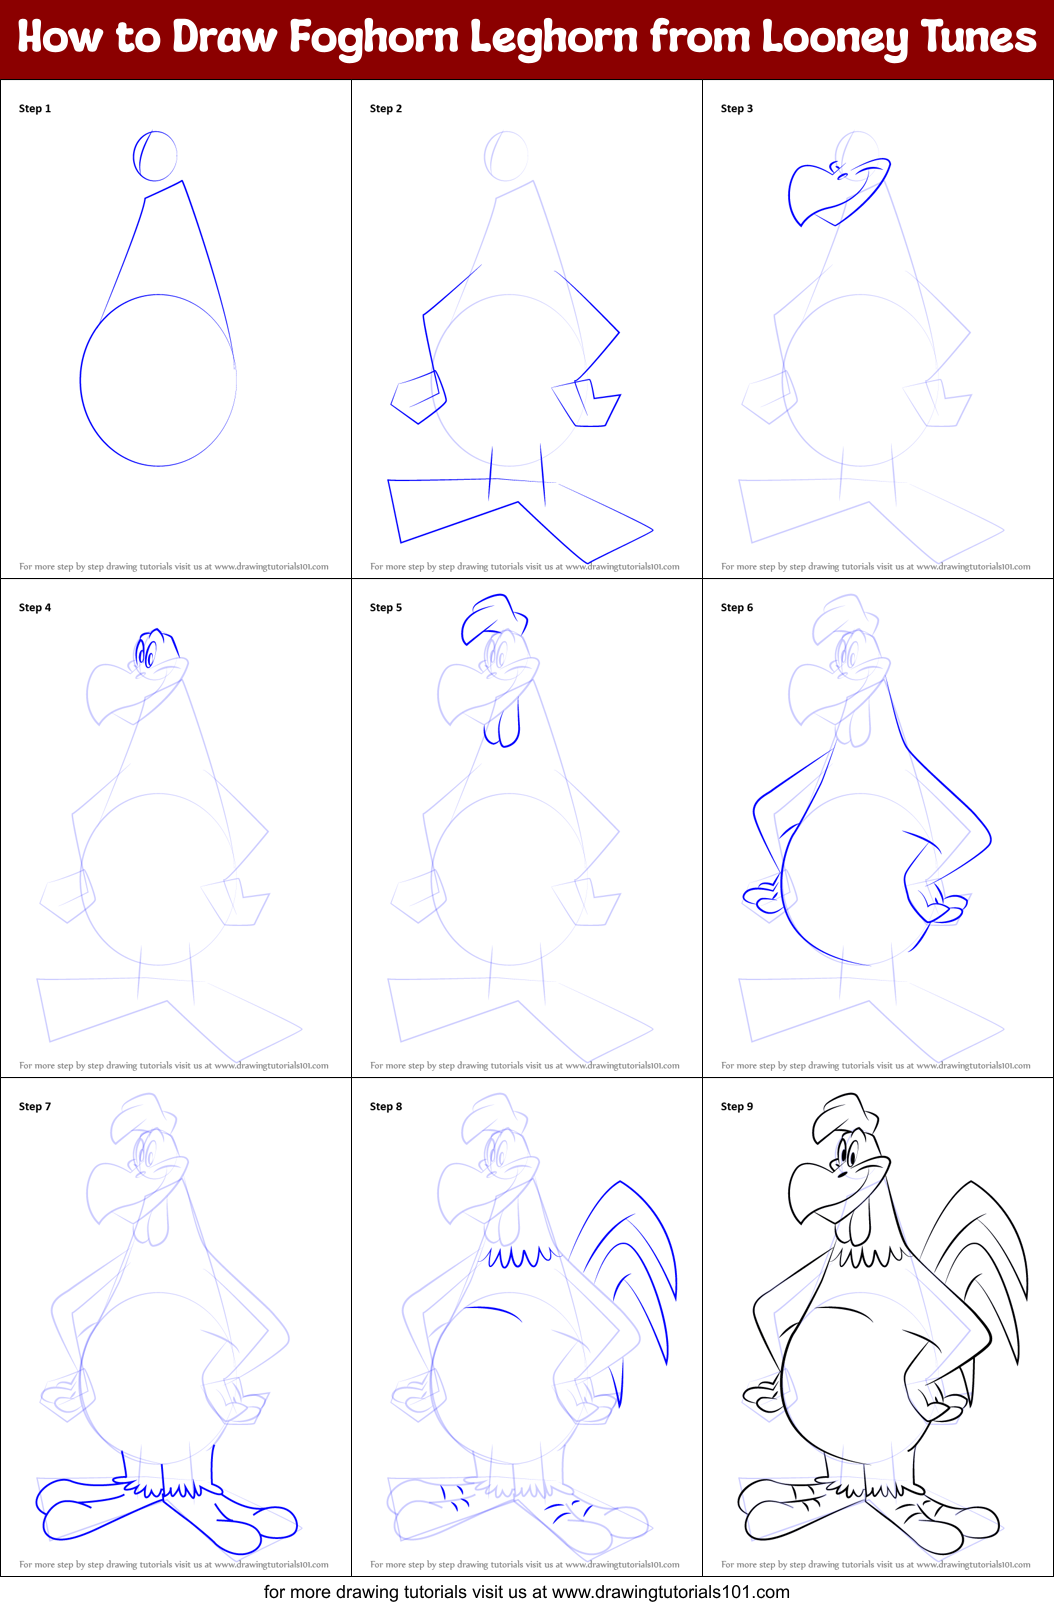 How to Draw Foghorn Leghorn from Looney Tunes printable step by step